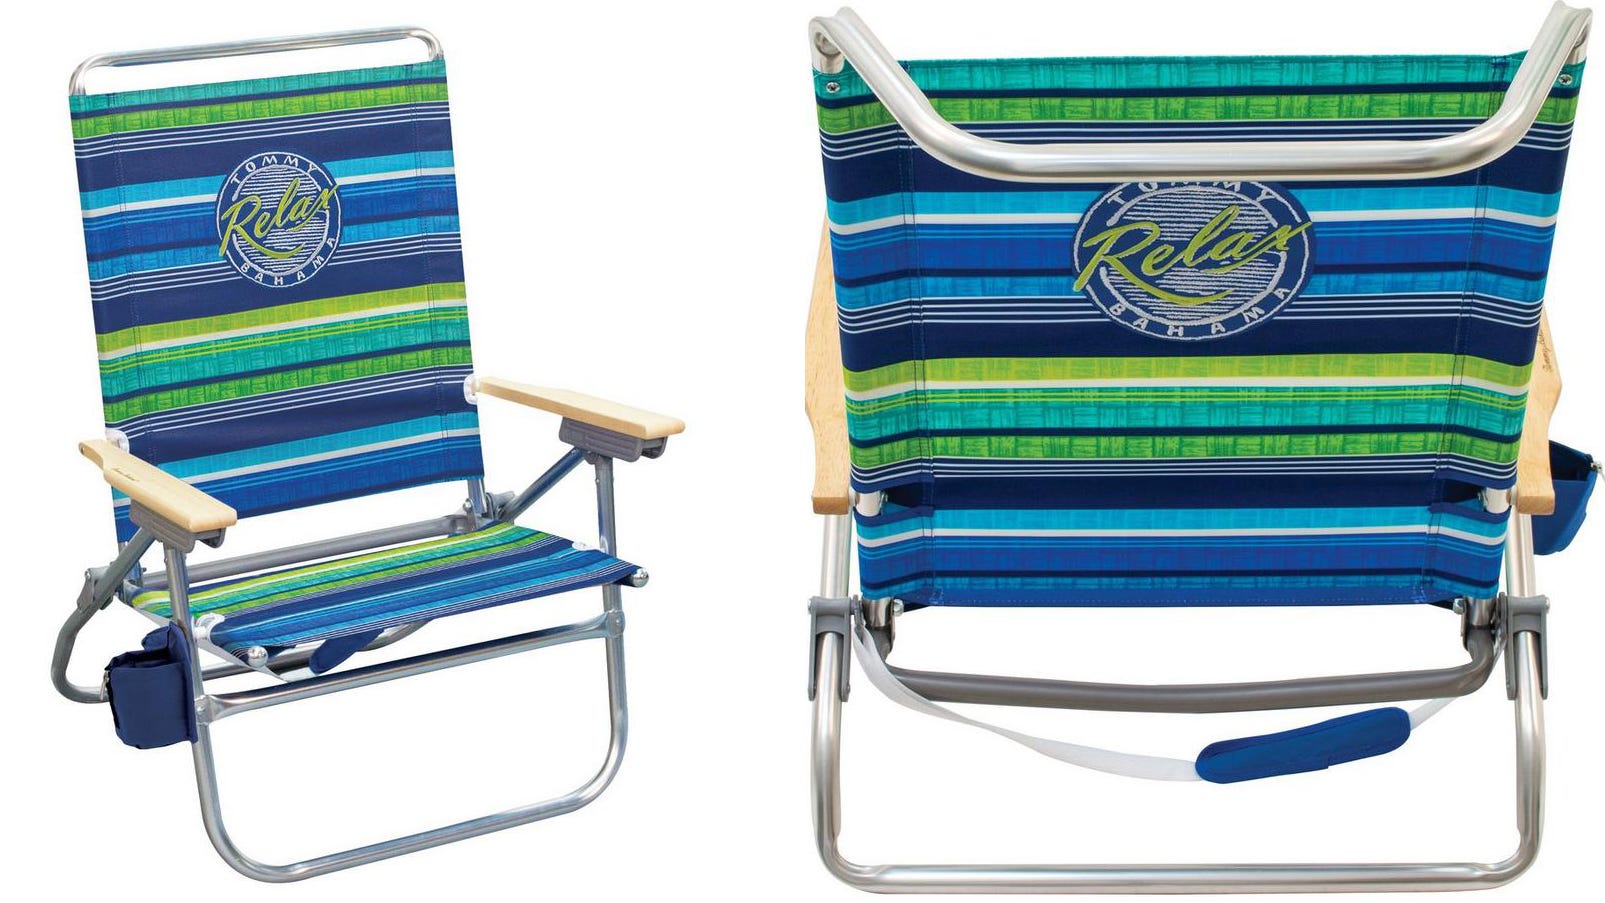 tommy bahama beach chair weight limit